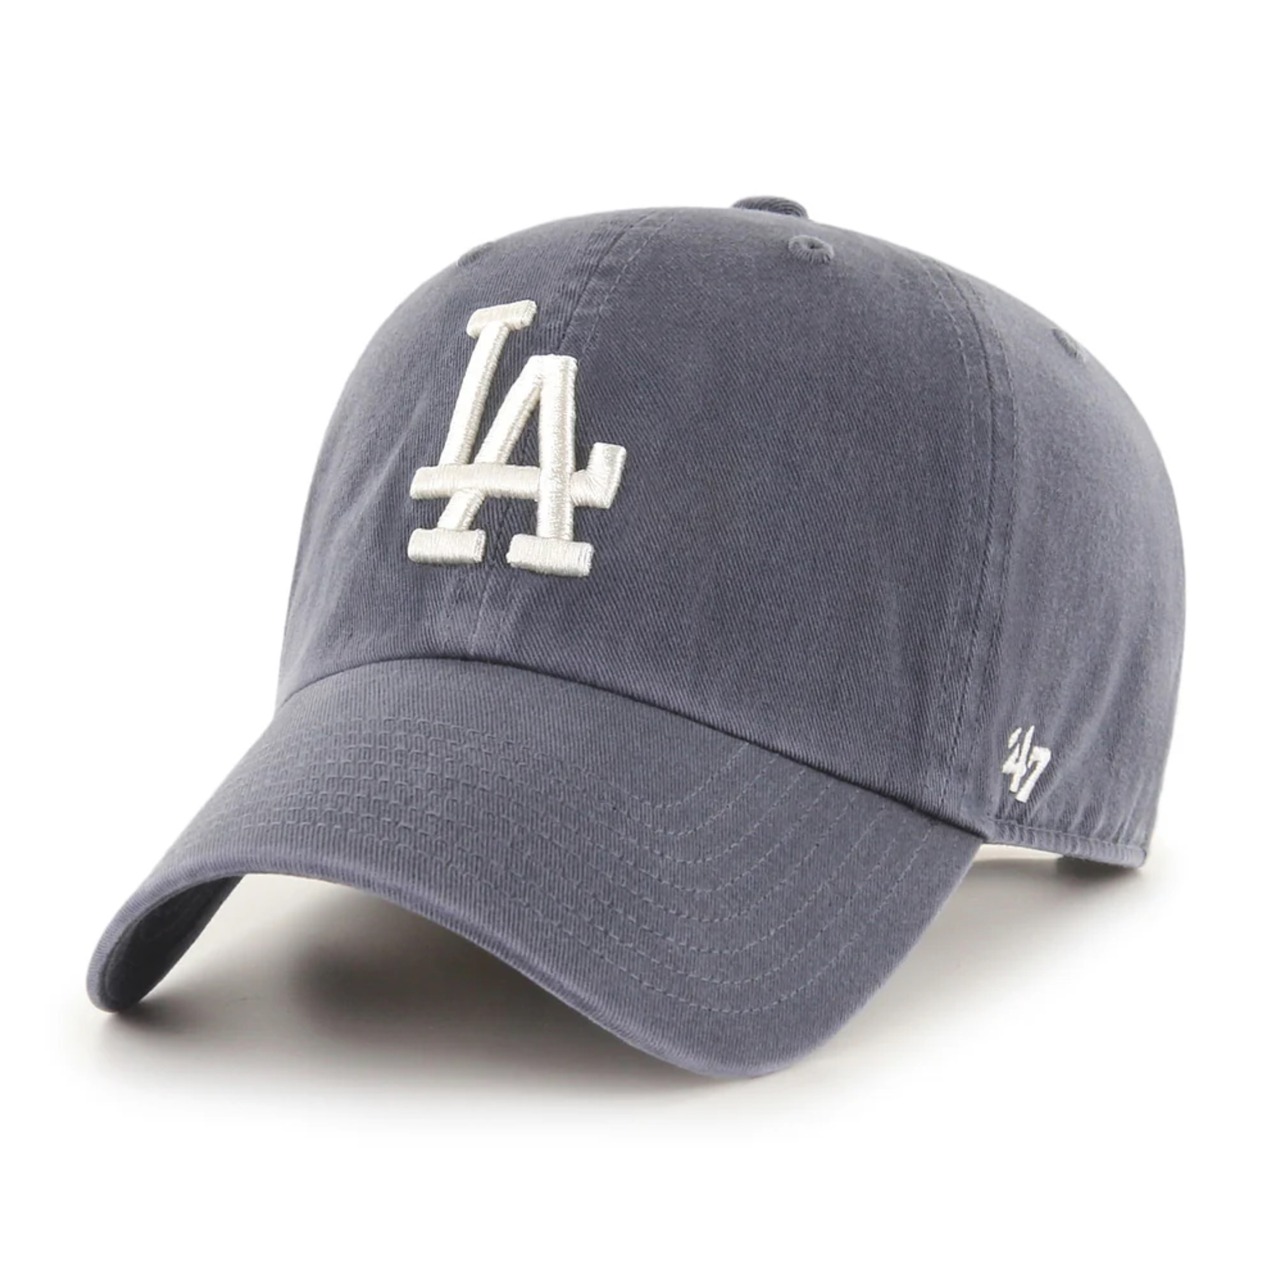 【47】Dodgers'47 CLEAN UP